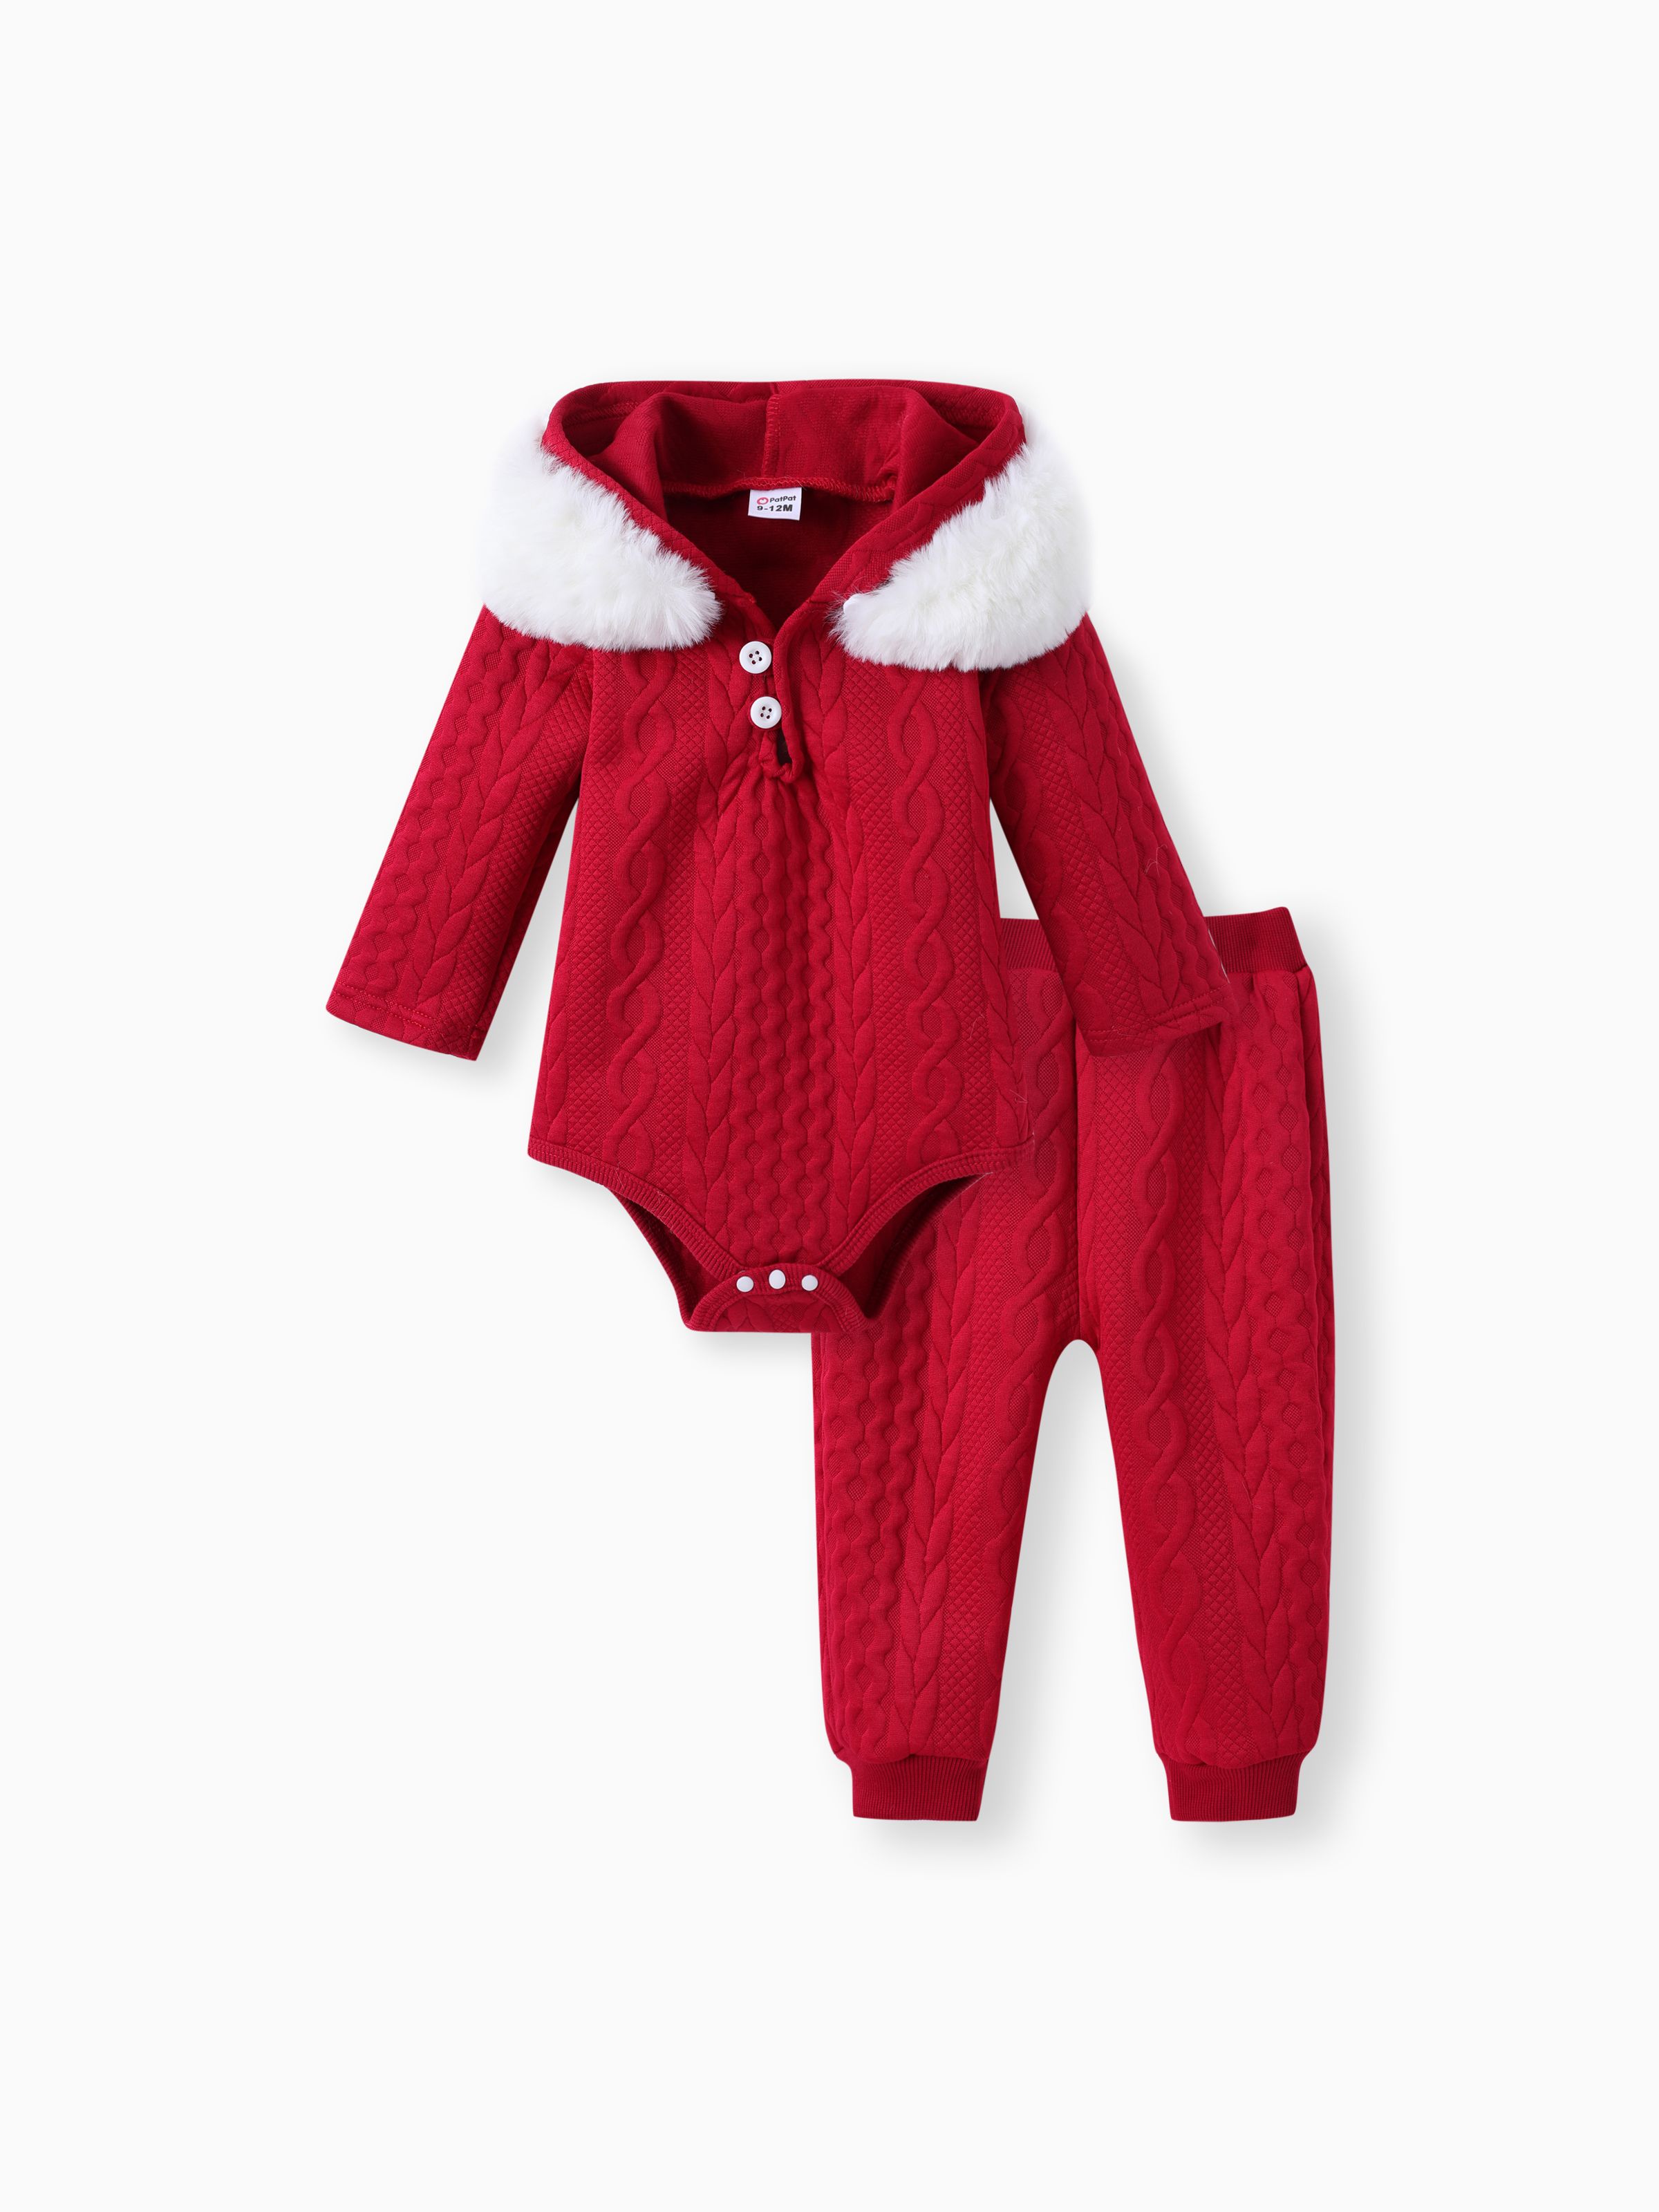 

2pcs Baby Boy/Girl White Imitation Knitting Textured Spliced Faux Fur Hooded Long-sleeve Romper and Pants Set